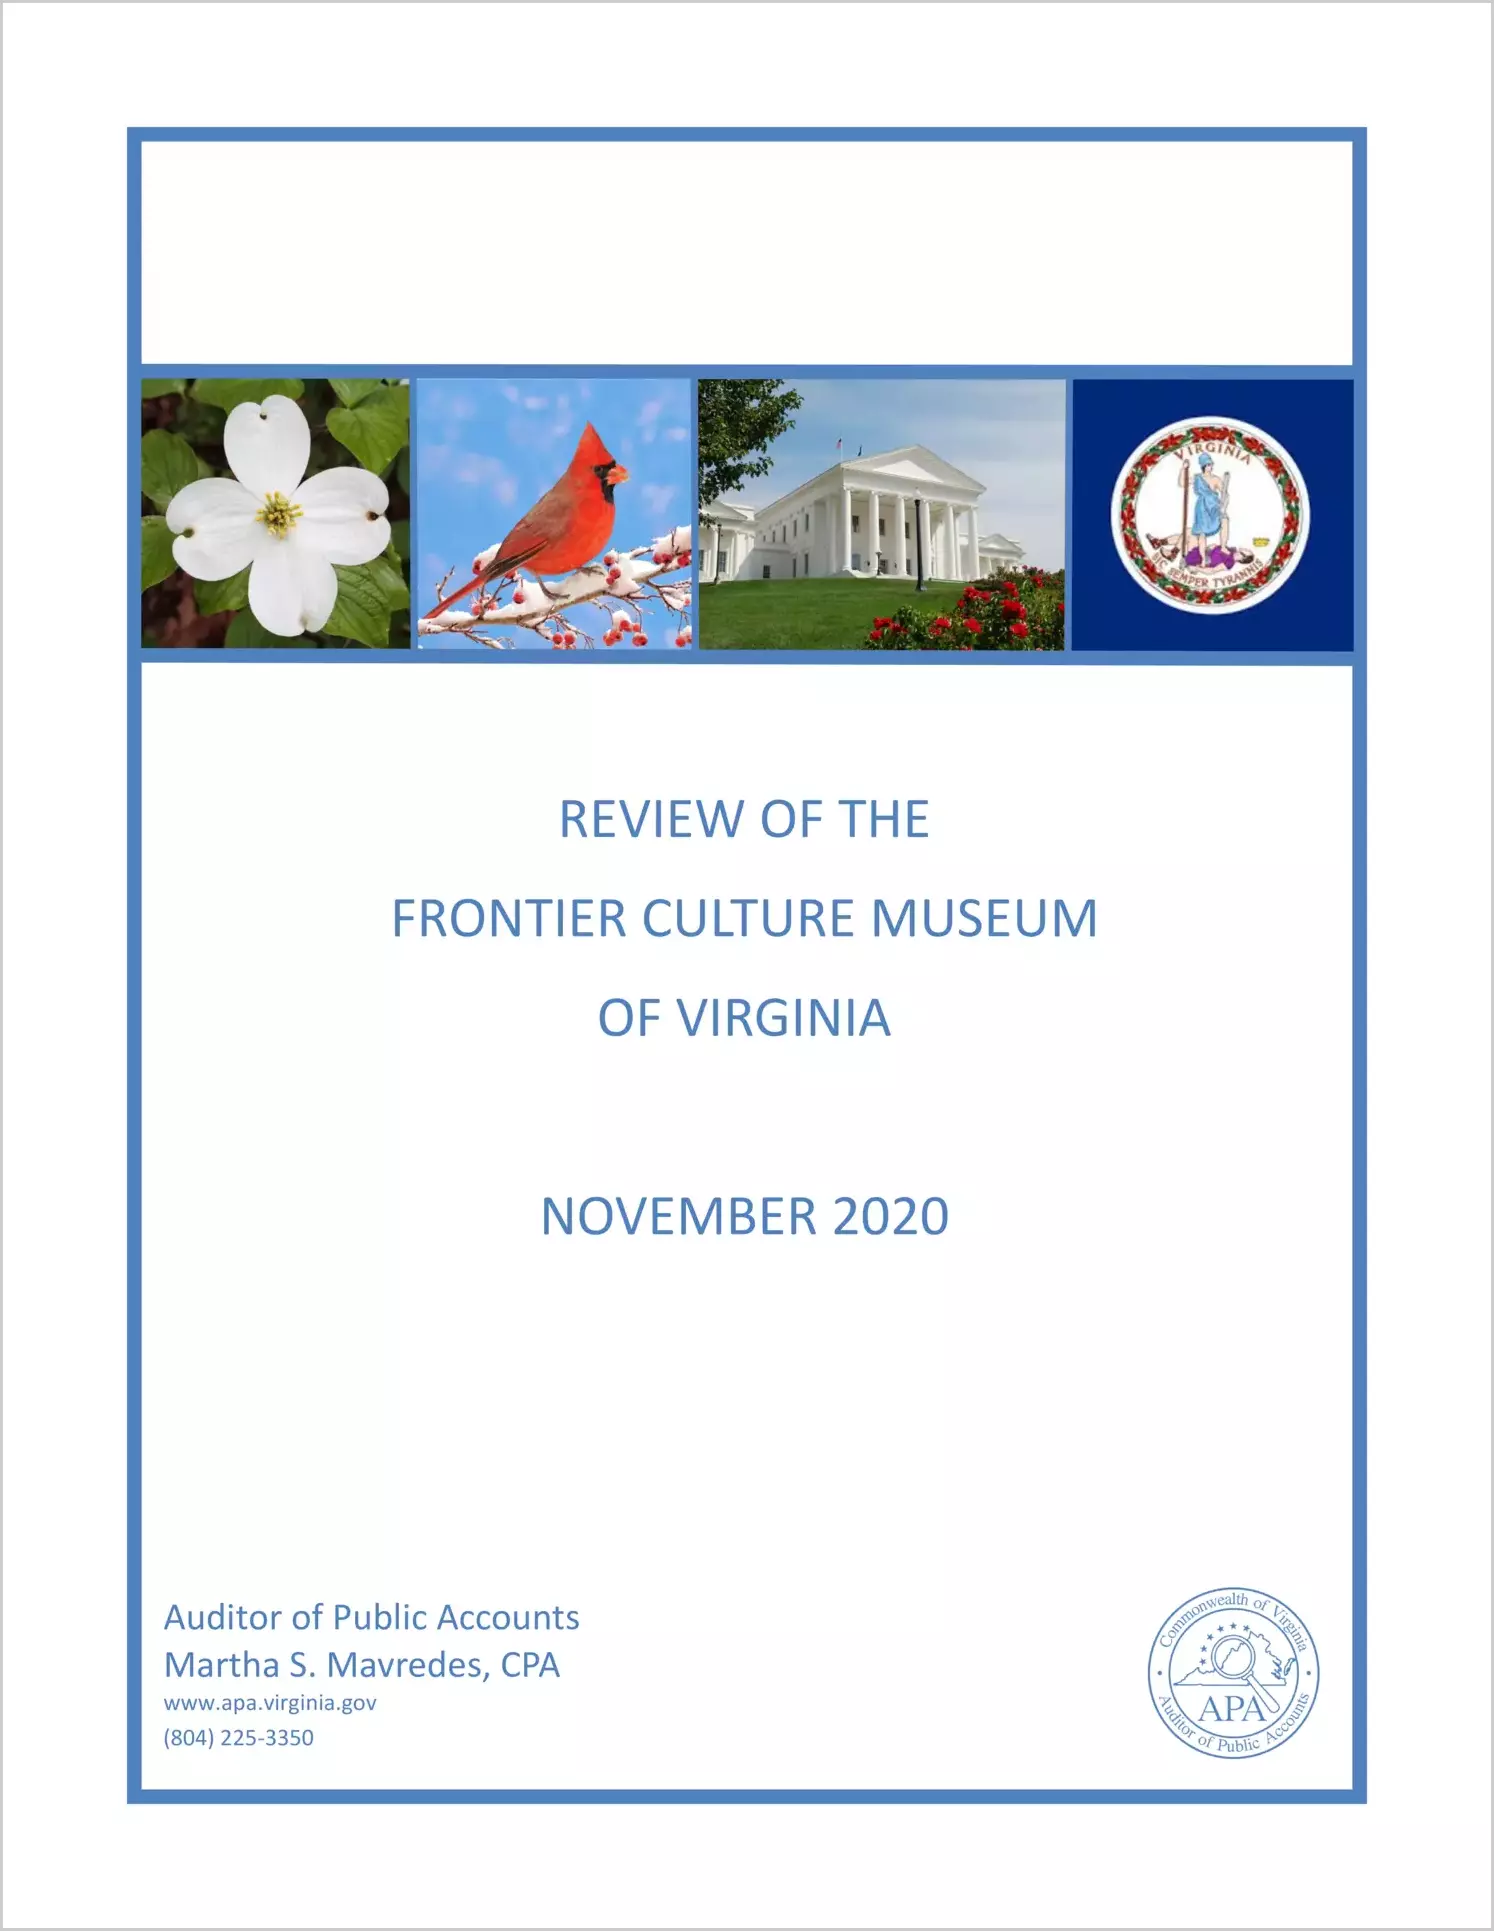 Review of the Frontier Culture Museum of Virginia - November 2020